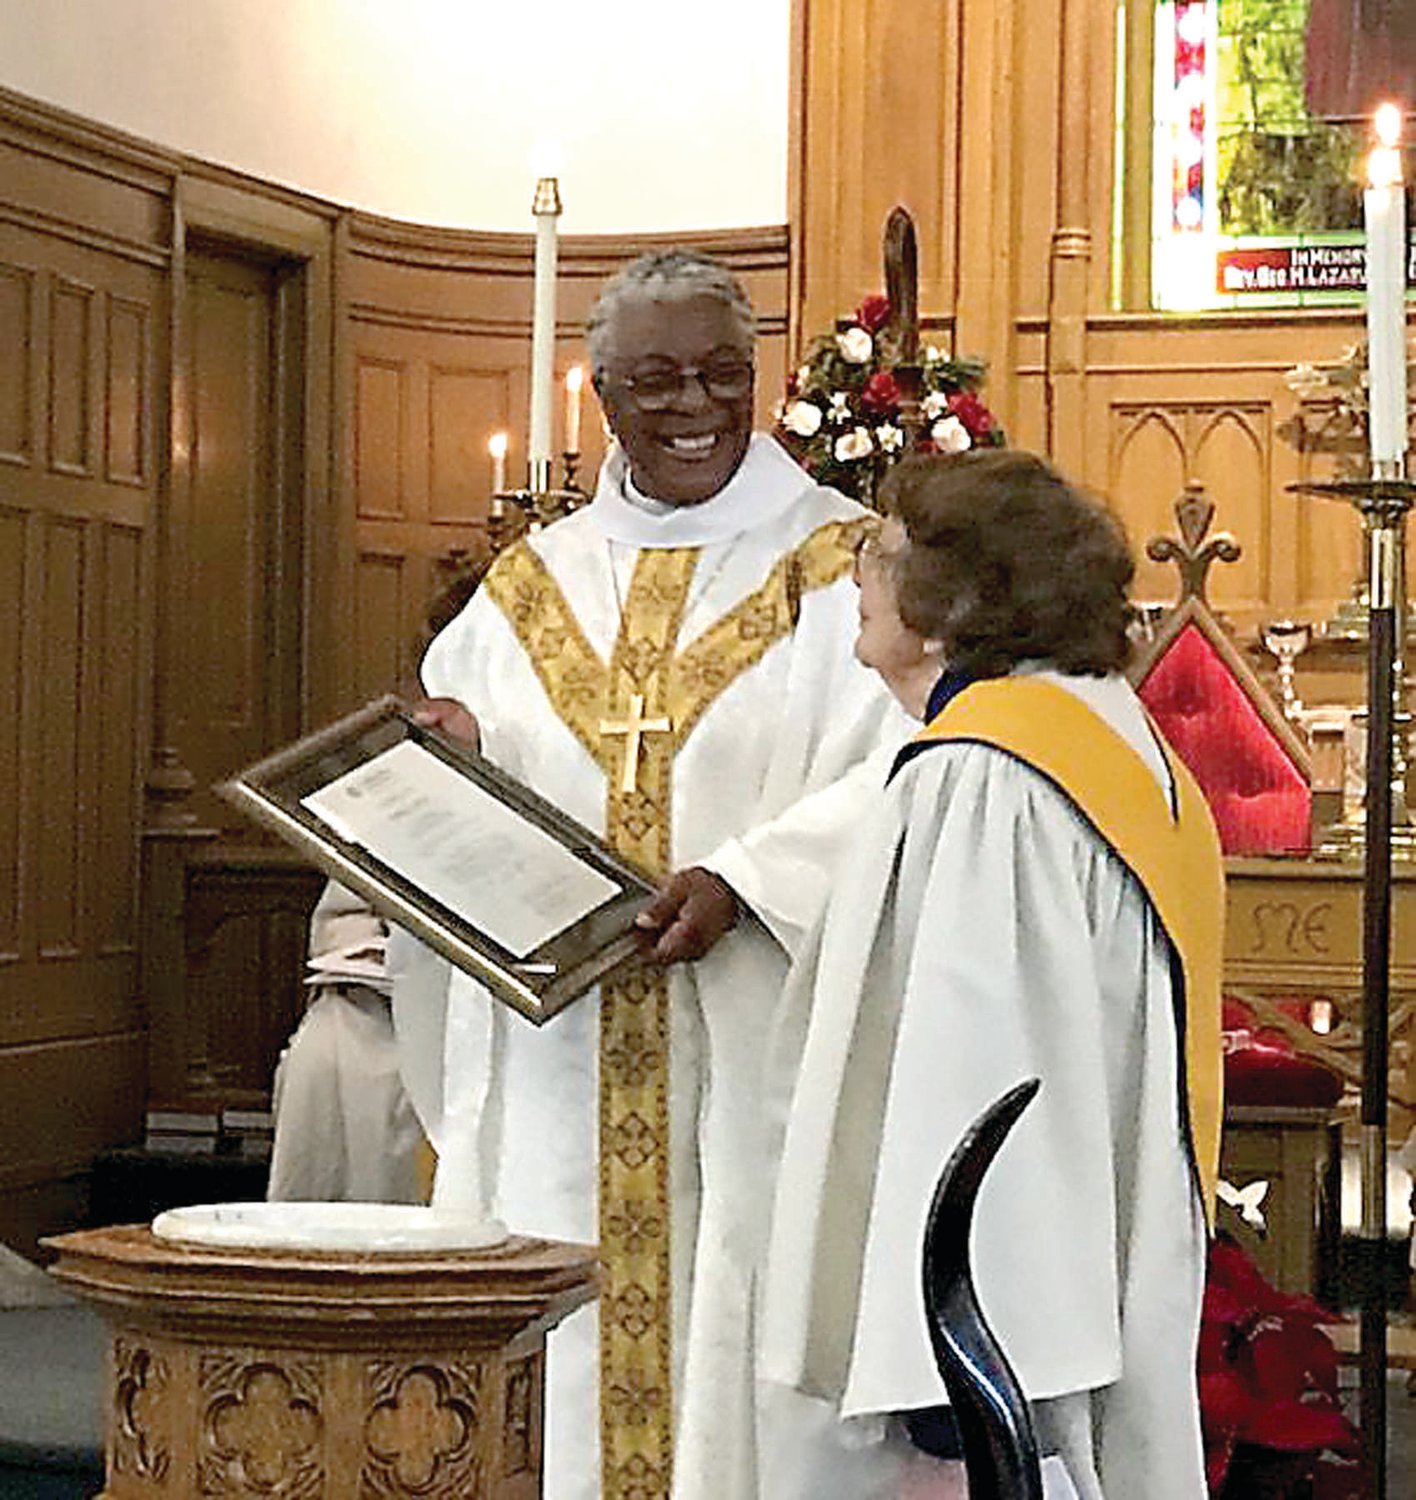 The Rev. Patricia Ann Curtis Davenport, bishop of the Southeastern Pennsylvania Synod of the Evangelical Lutheran Church in America, left presents Martha Fisher, organist-choir director, with a certificate commemorating her 33 years serving as a deacon of St. John’s Evangelical Lutheran Church in Quakertown.